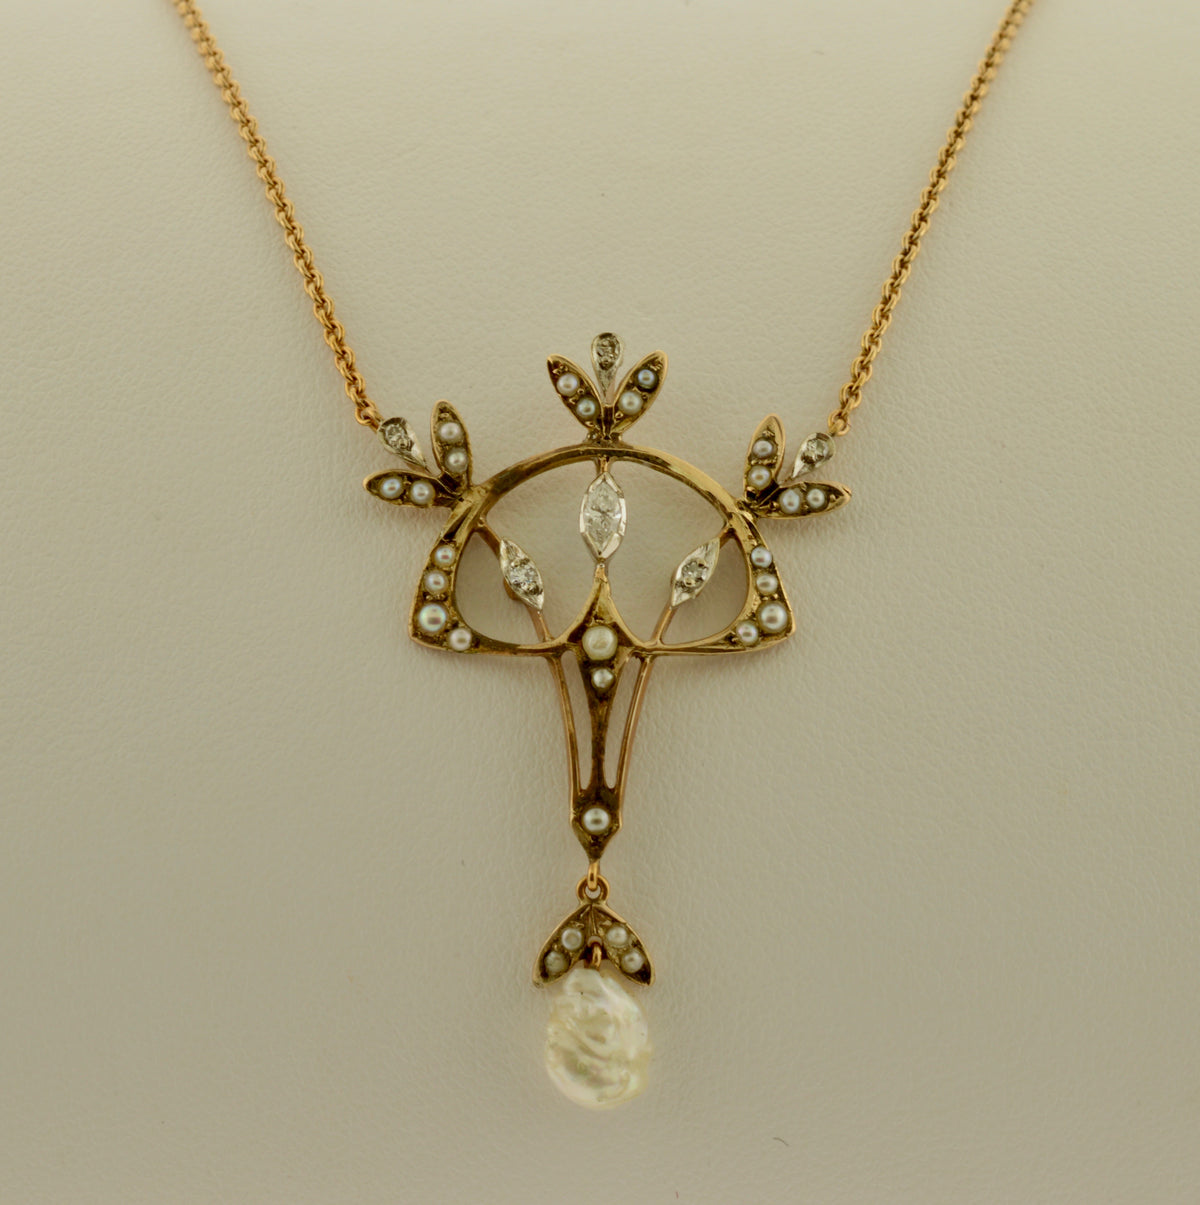 10K Antique Diamond and Pearl Gold Lavalier Necklace